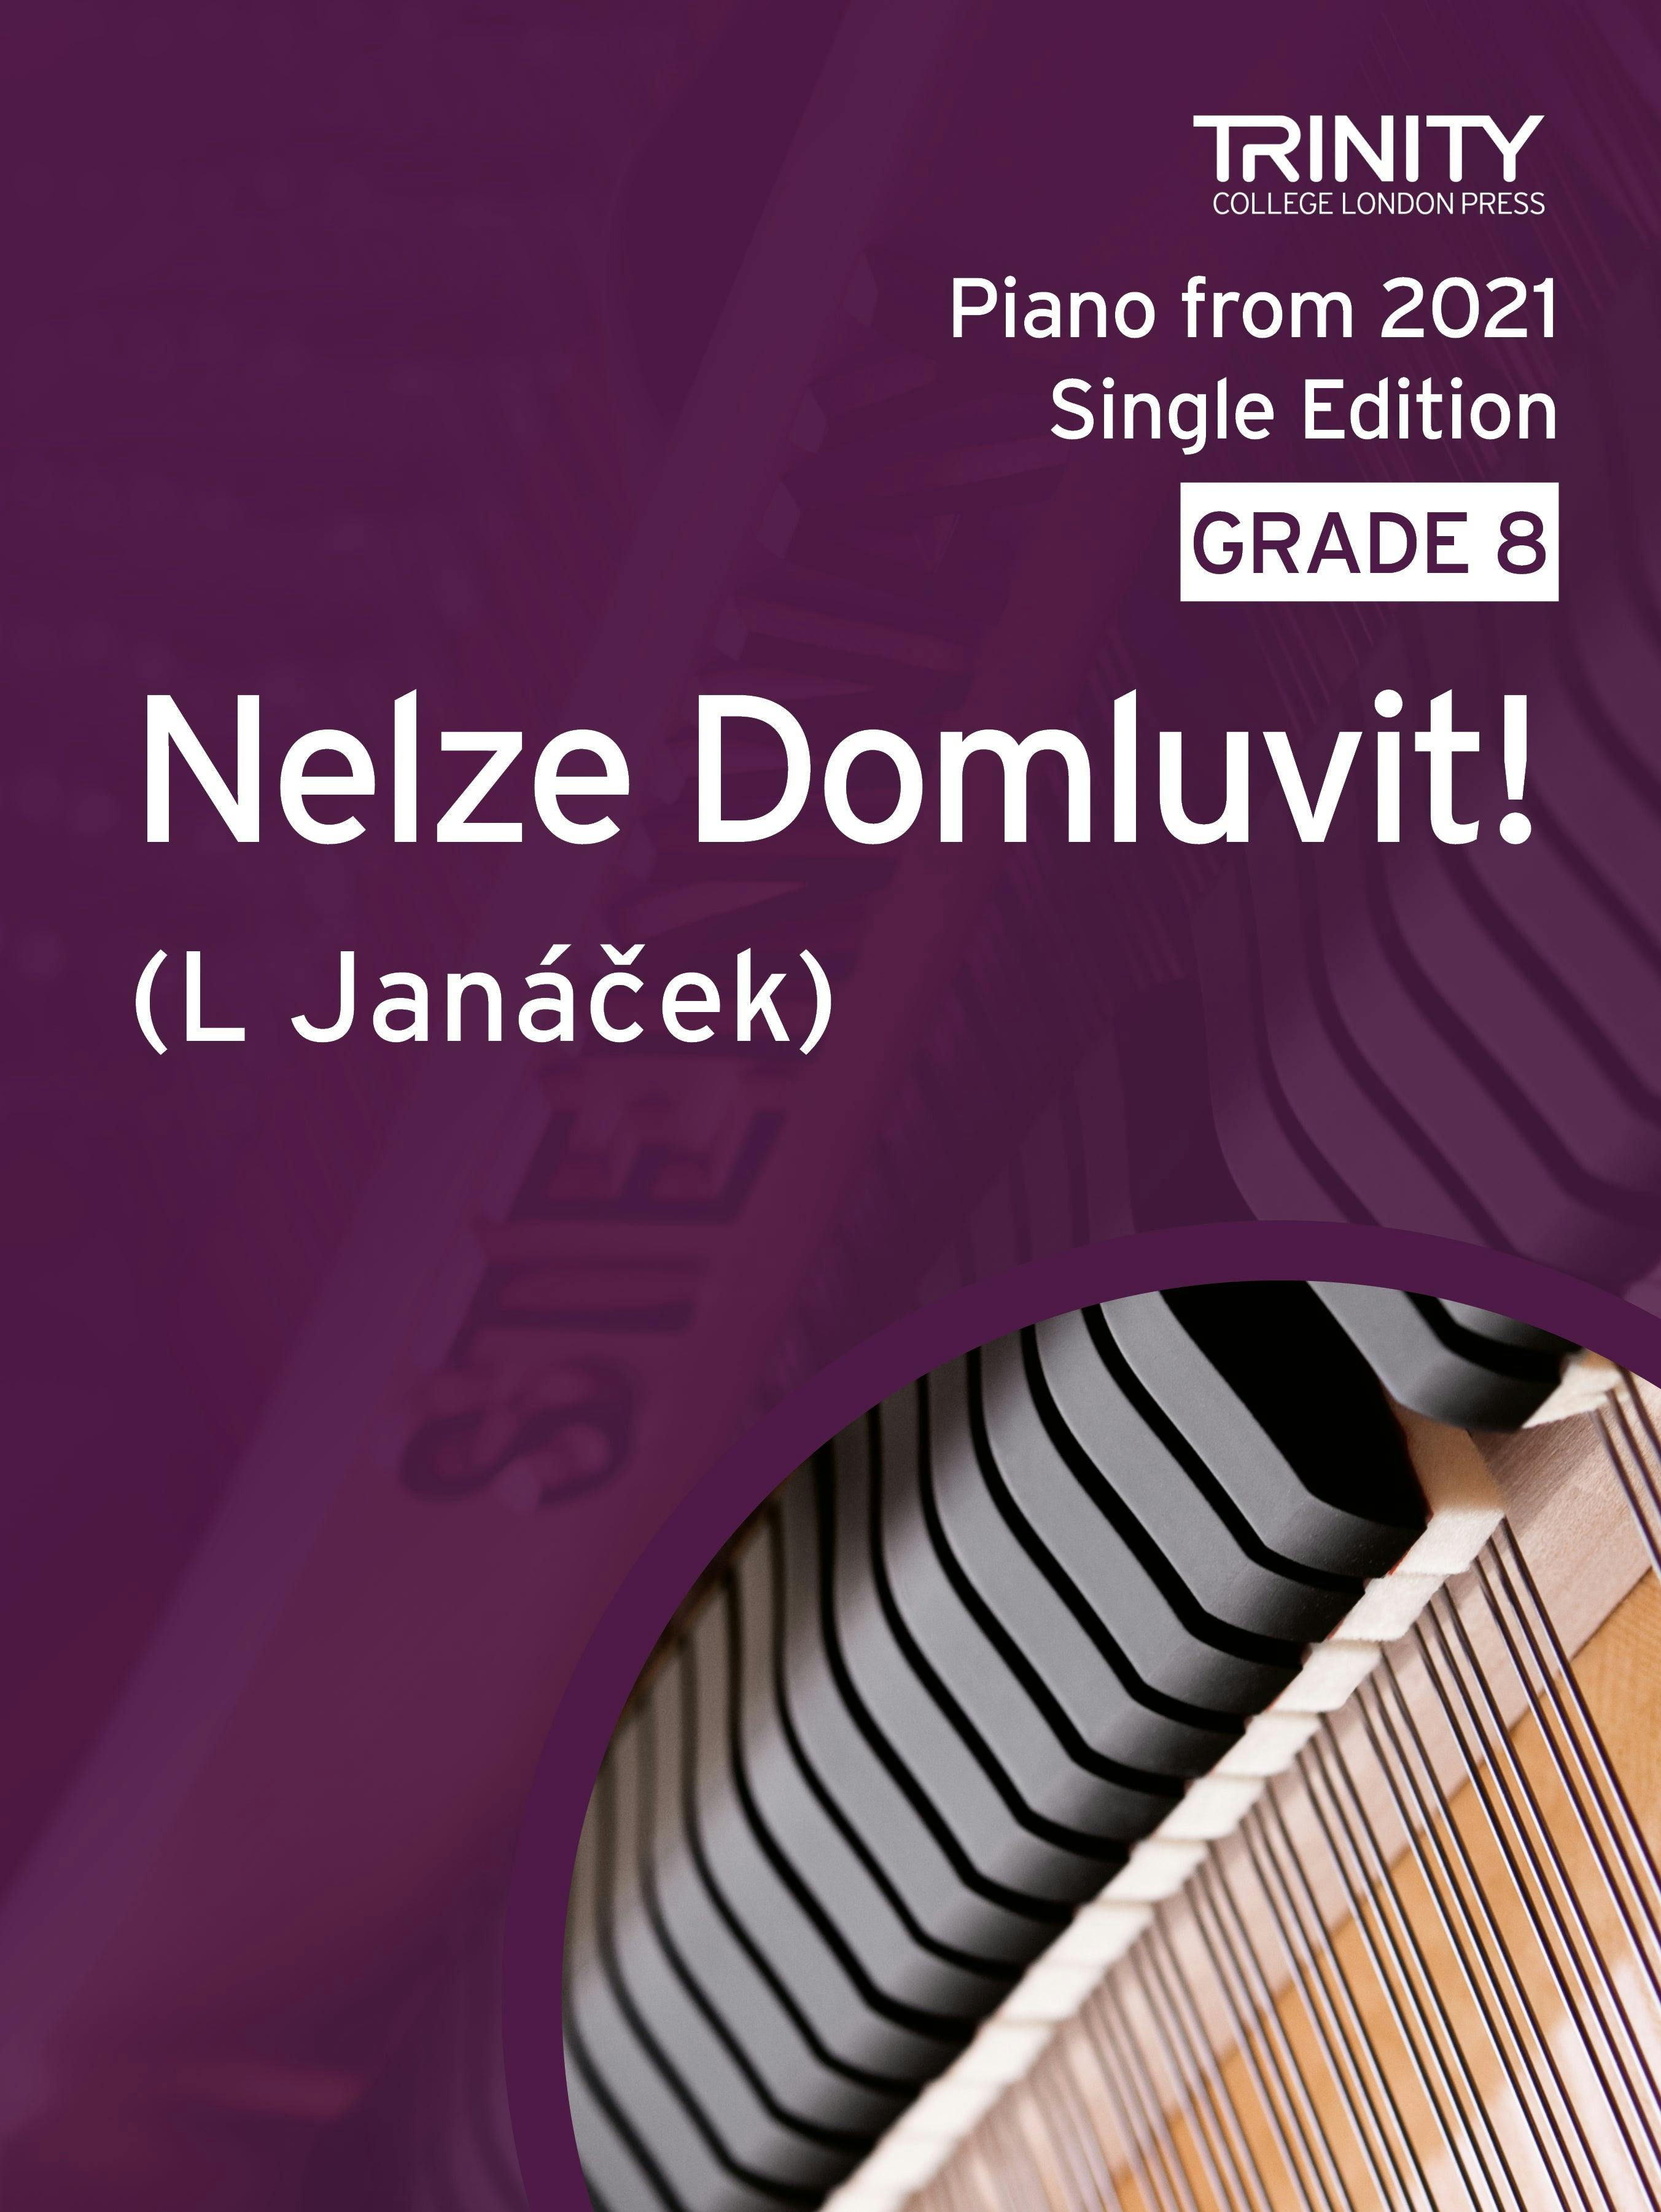 Nelze Domluvit! (Lost for Words!) (no. 6 from On an Overgrown Path) - Janáček (Grade 8 Piano) - ebook